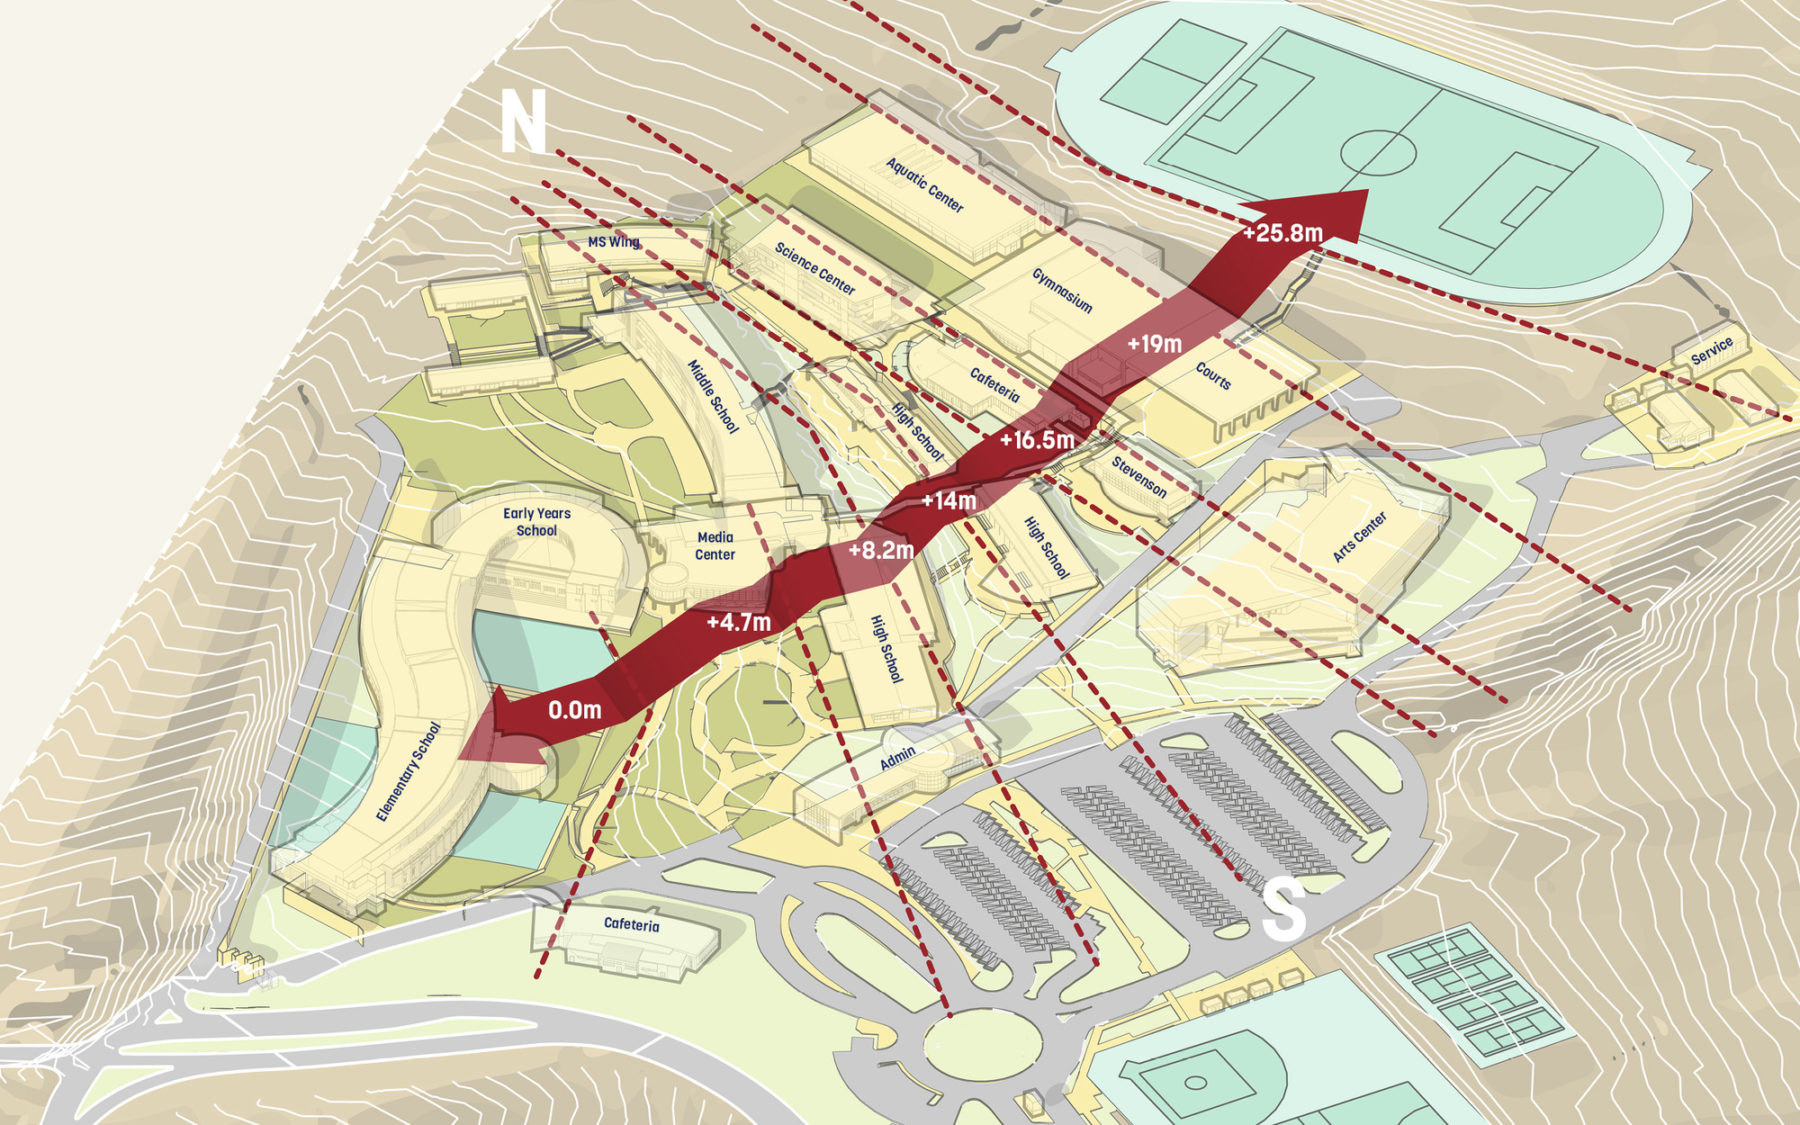 aerial diagram showing the topography change across campus. a red arrow labeled with different meter elevation markers notes the change.